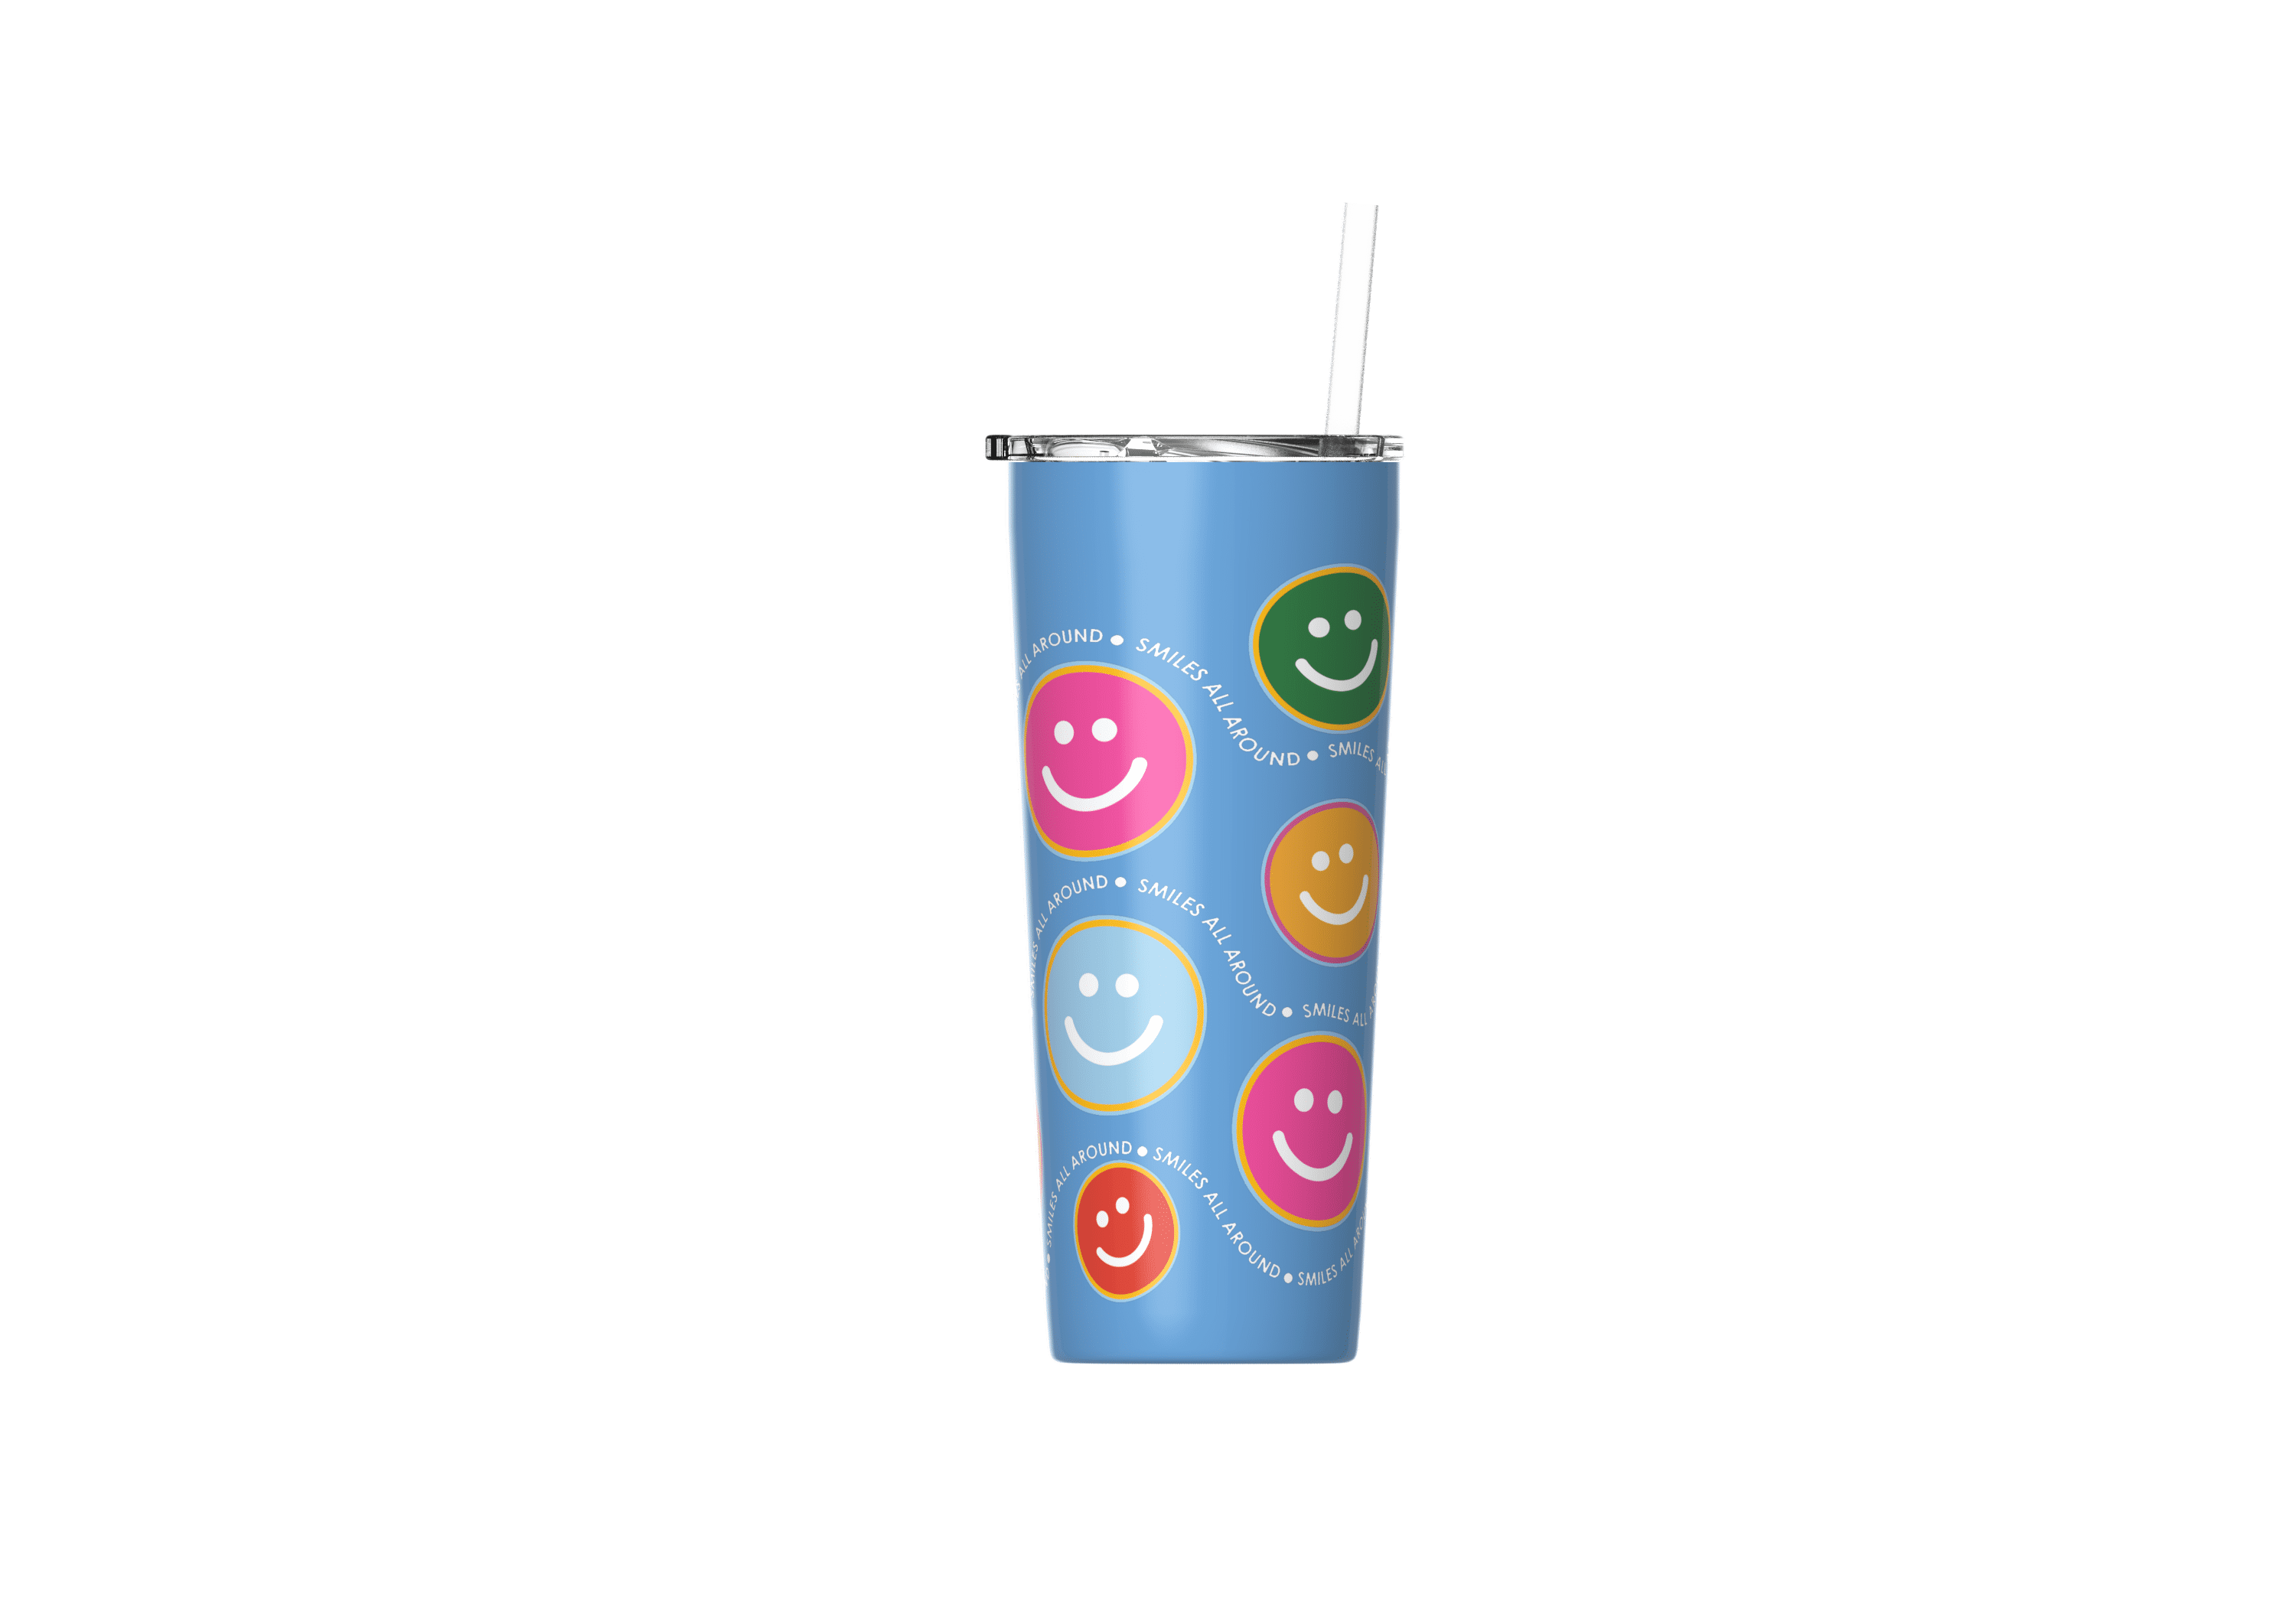 SMILE because all of the MultiShaker Straw Lids from our